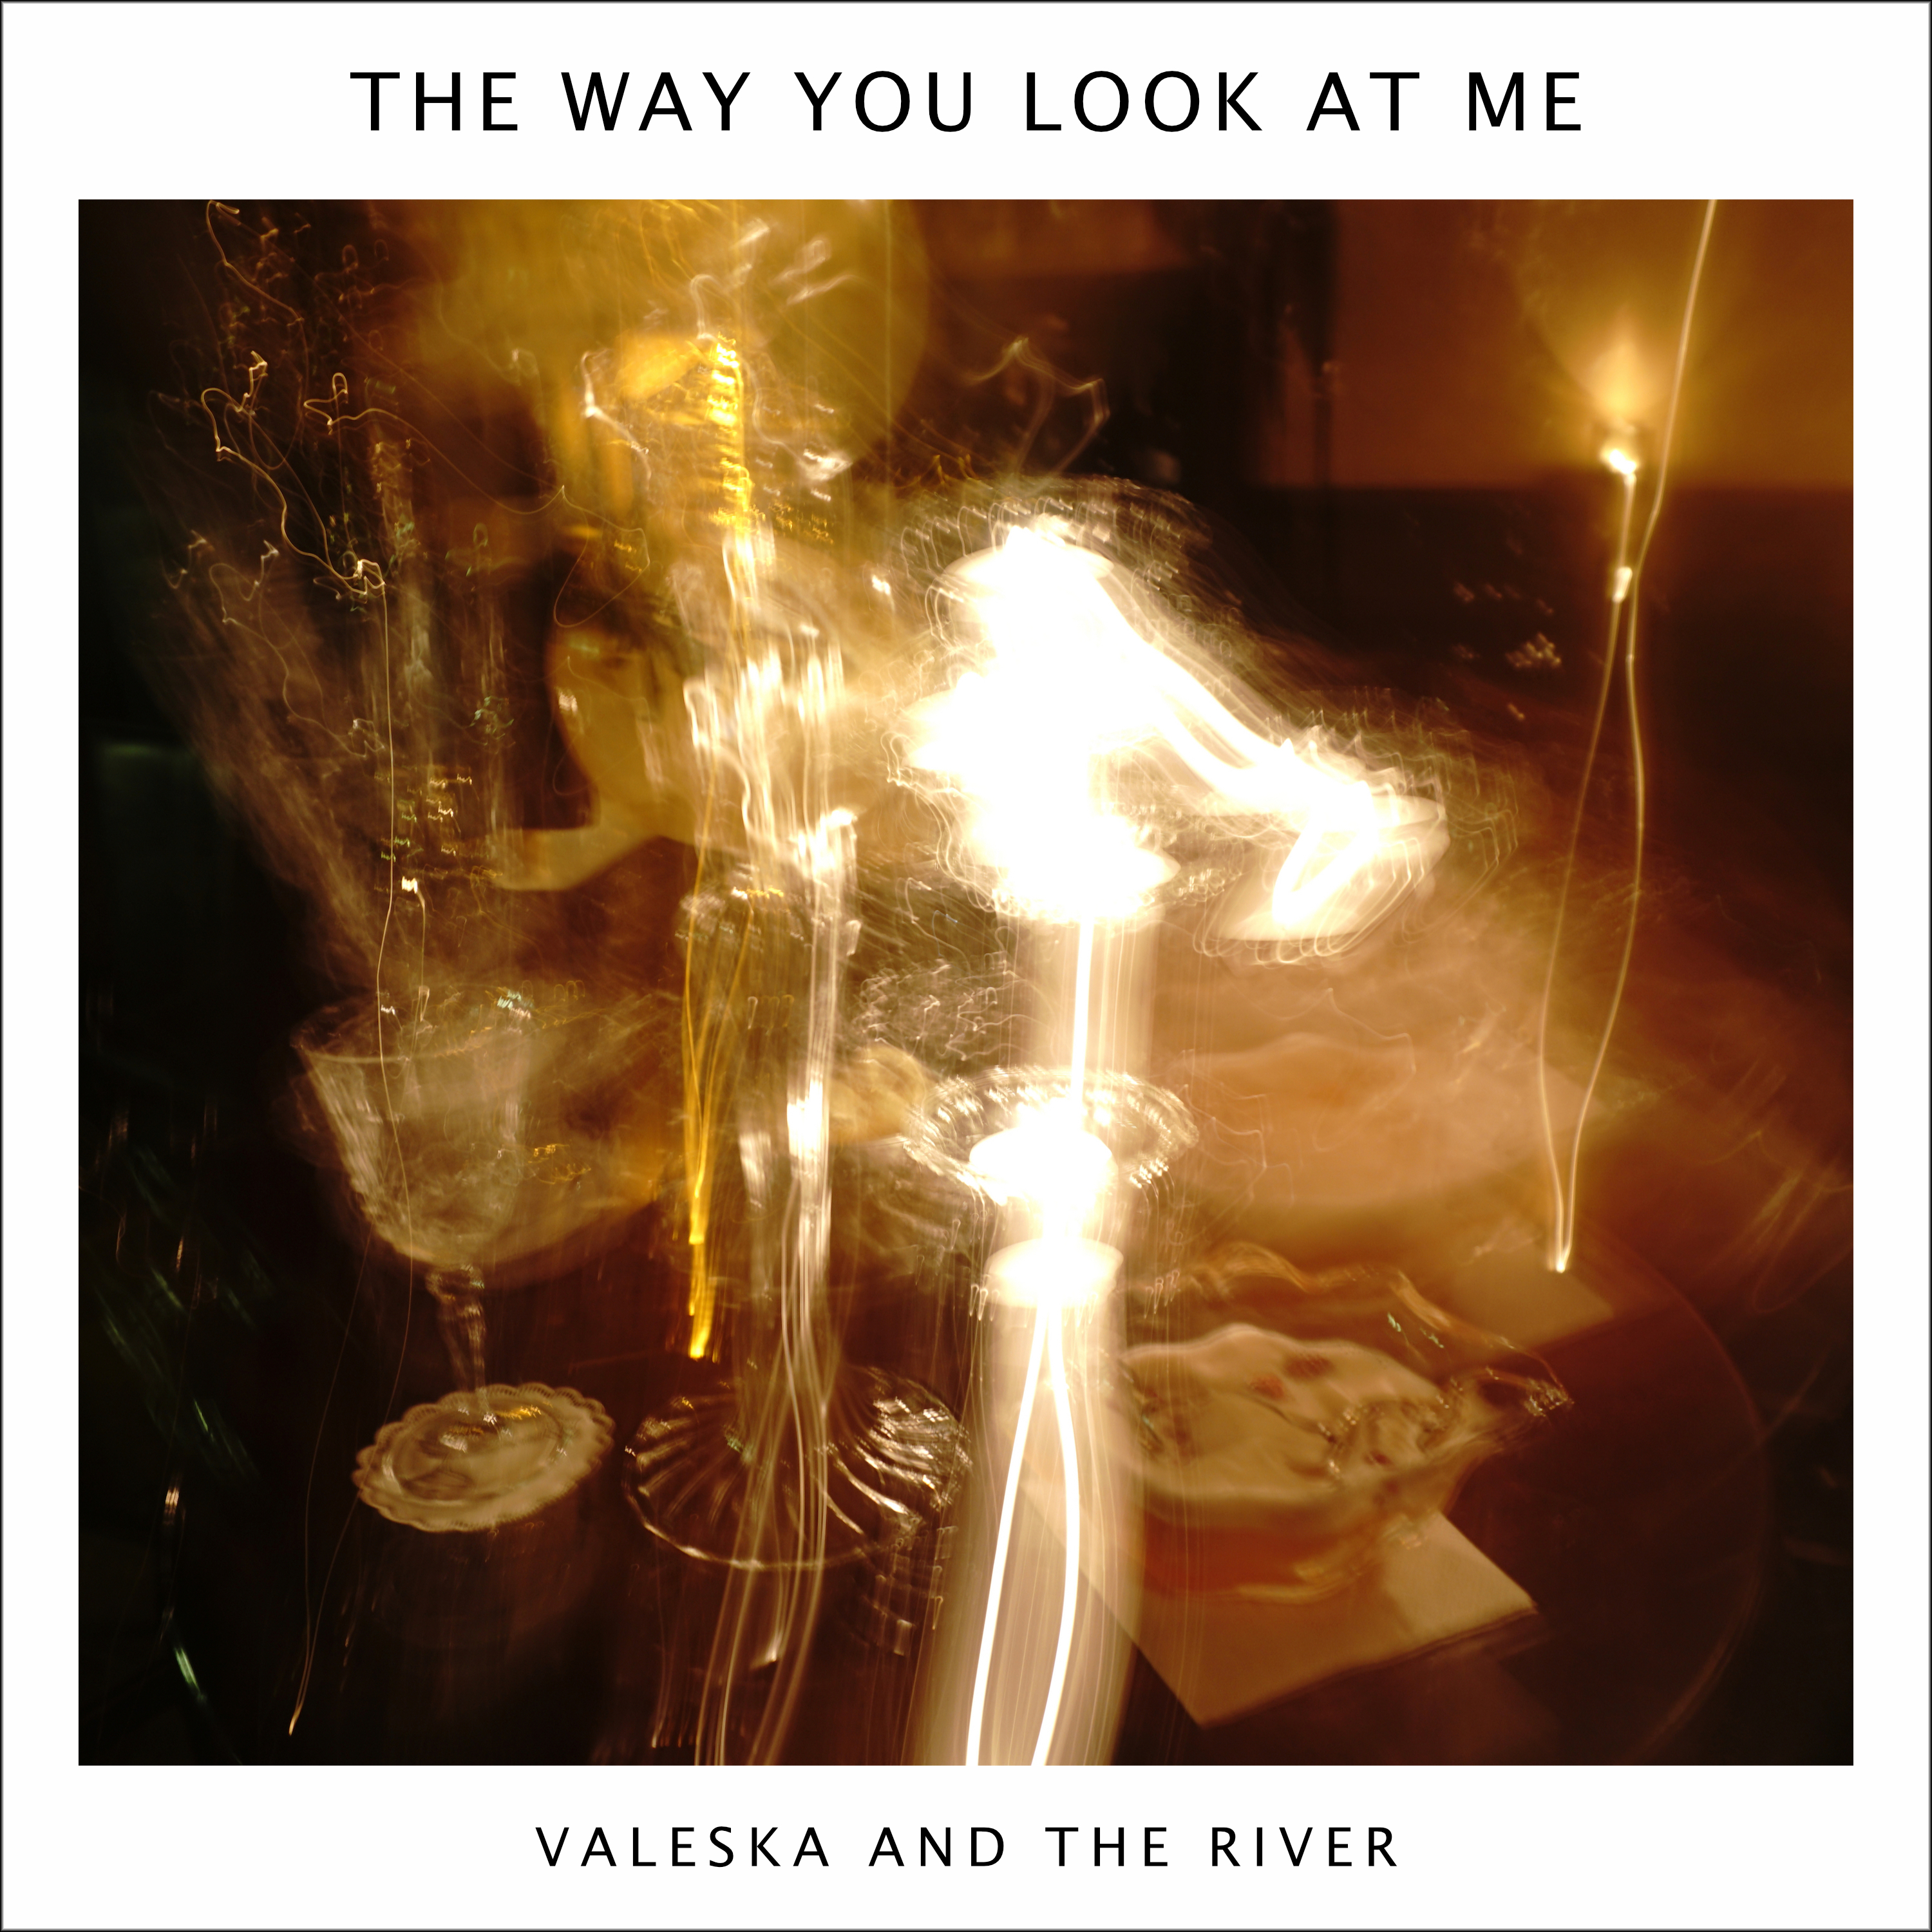 The Way You Look At Me – Out Now